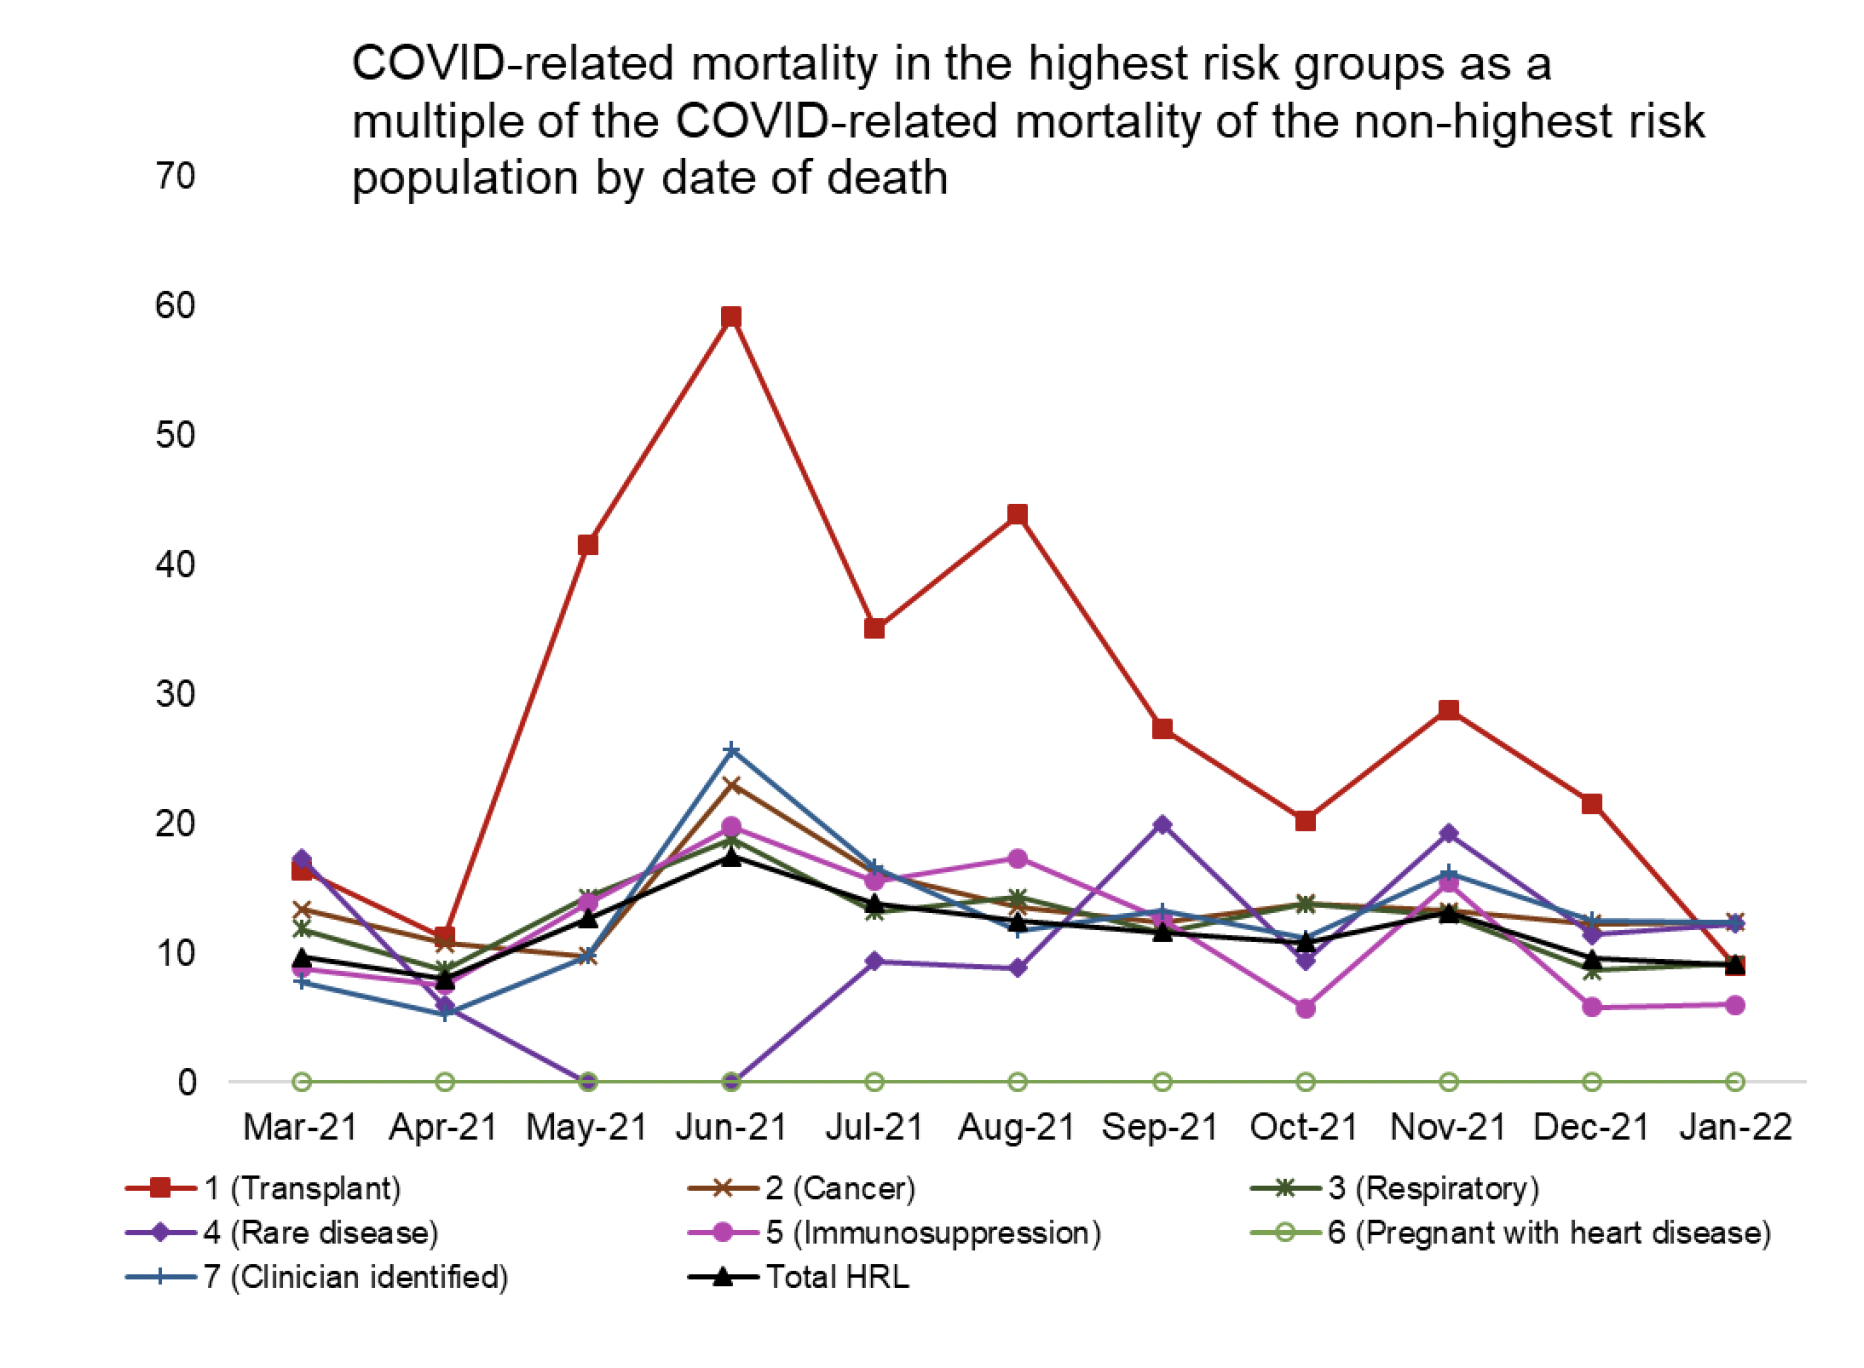 Figure 7 shows the number of COVID-related deaths by highest risk group and date of death. The number of COVID-related deaths amongst the Highest Risk List in Scotland remains highest for those in the respiratory and clinician identified groups. It is lowest for pregnant with heart disease (where there have been no deaths) and in the transplant group.